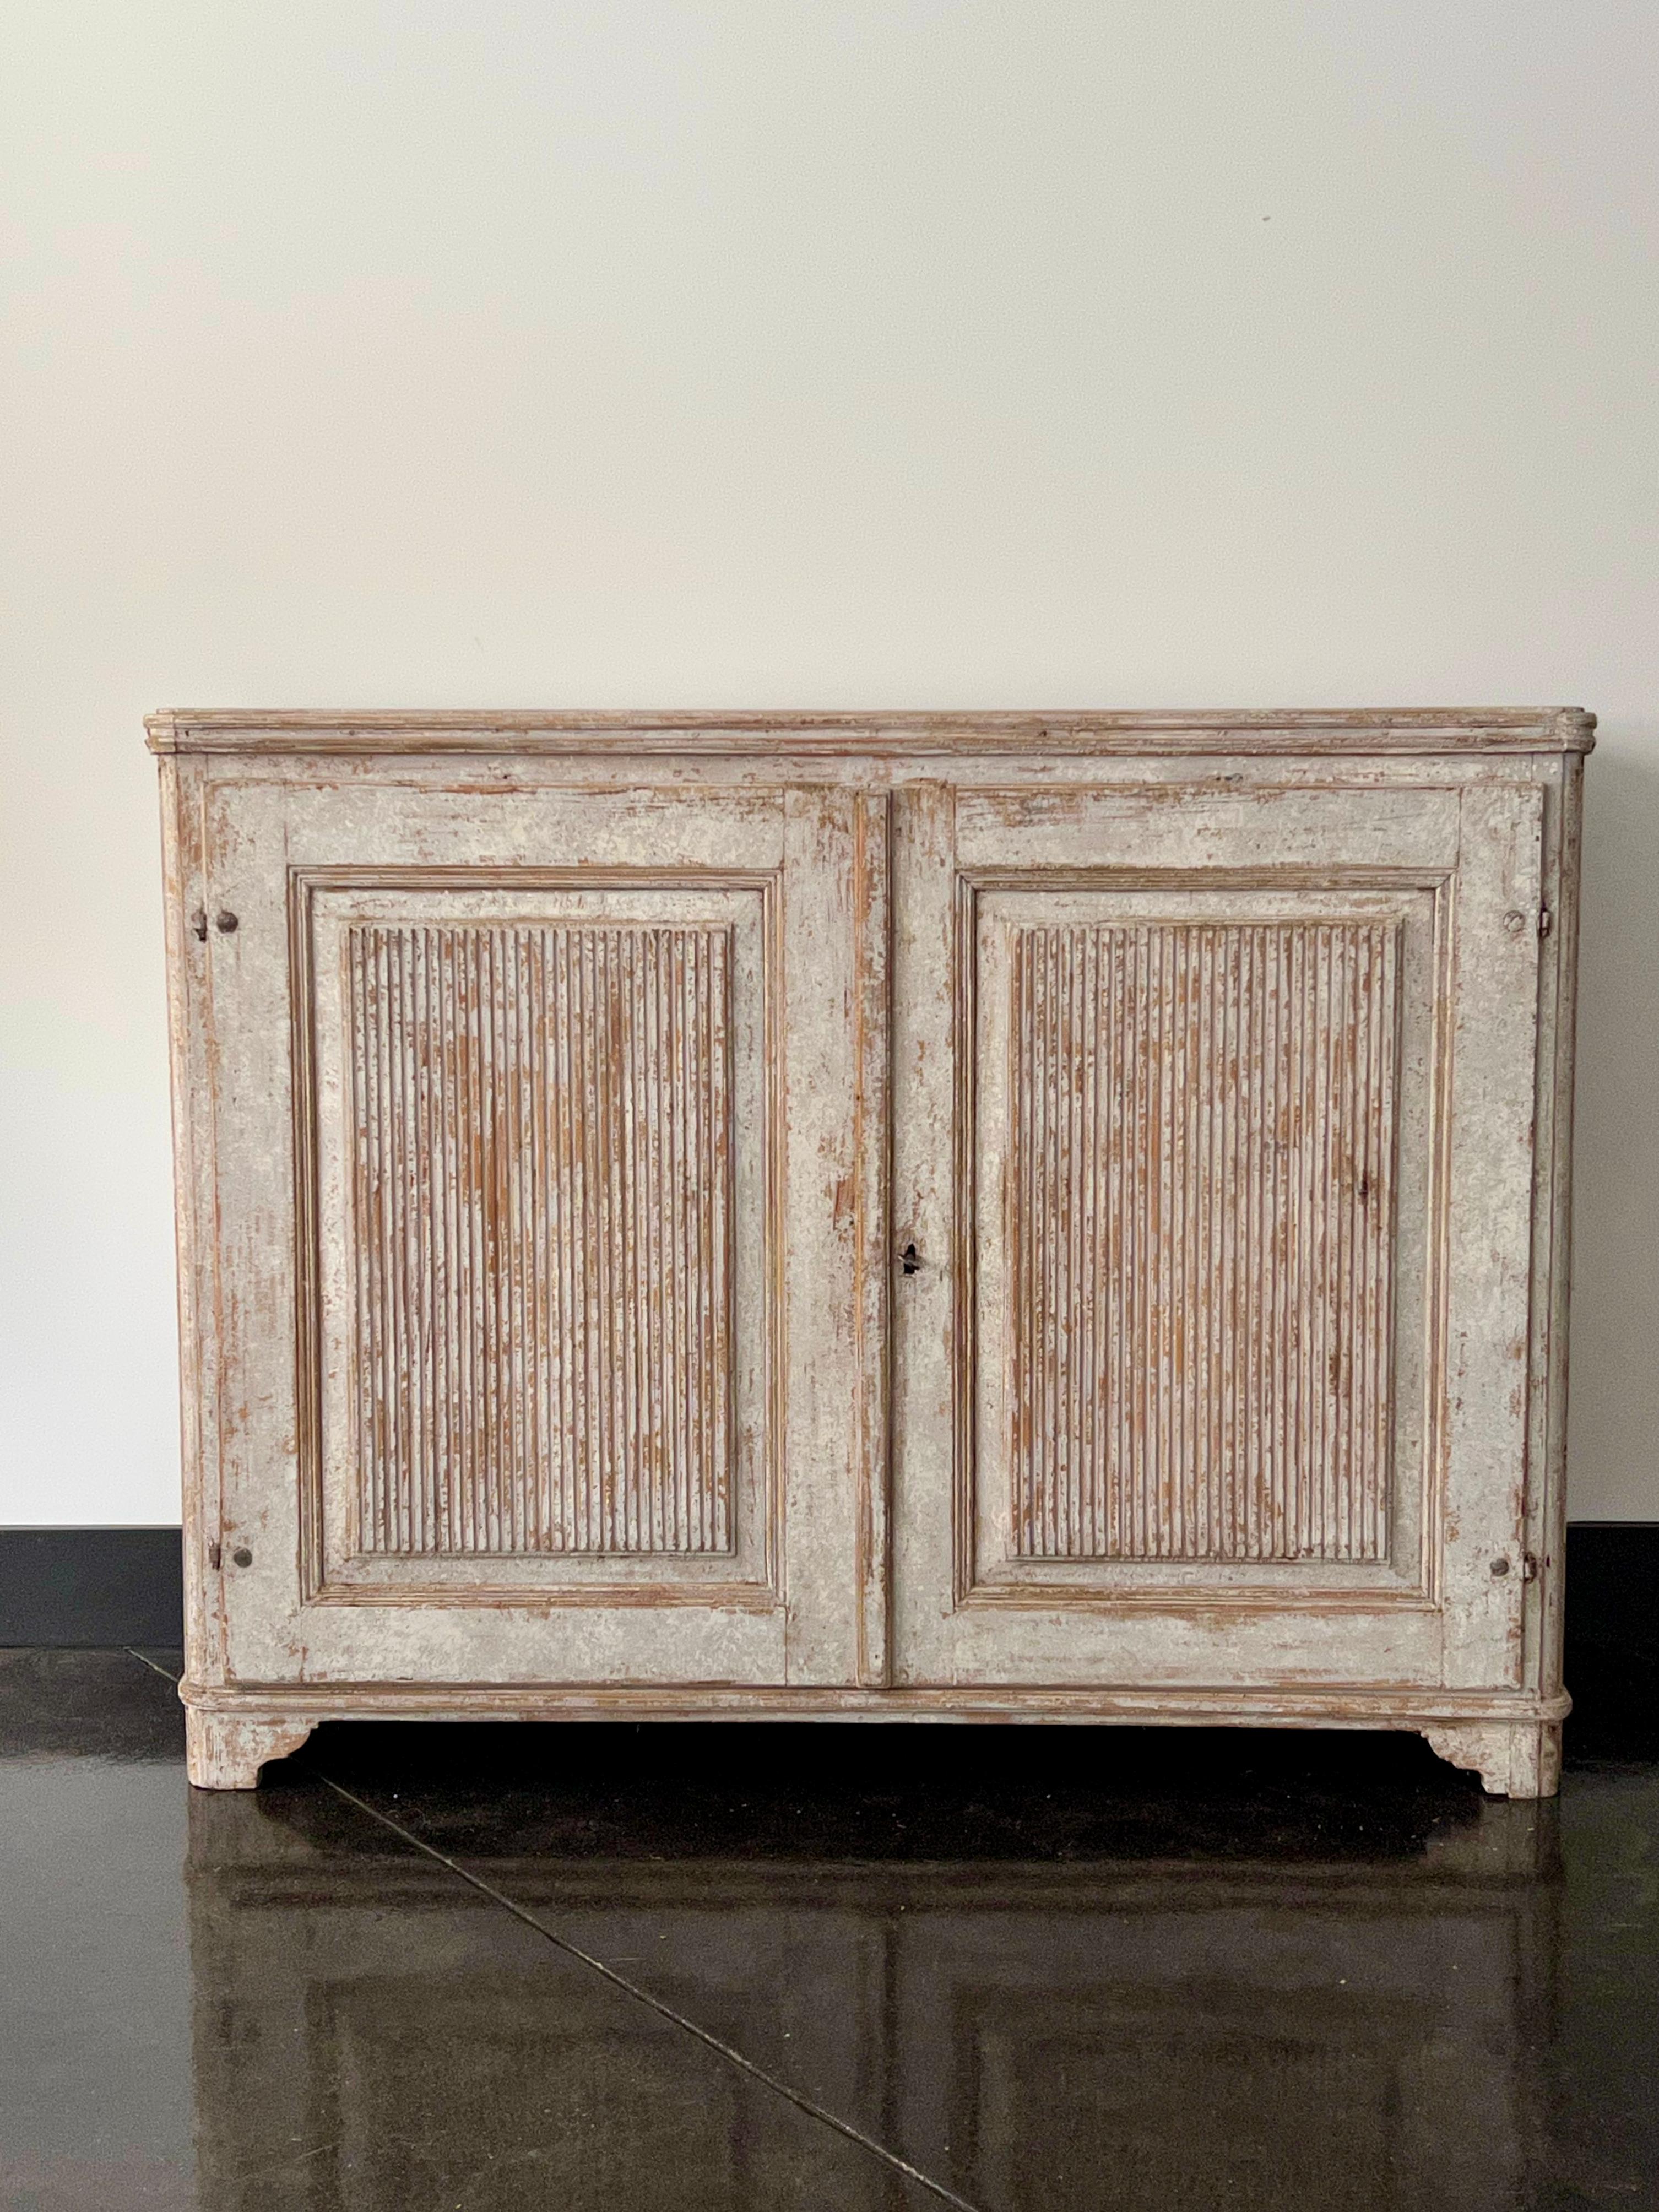 An classic, very large Gustavian period sideboard with beautifully carved reeded and panelled door fronts on shaped block feet. Later paint scraped off to its most original finish.
Uppsala, Sweden, circa 1800.